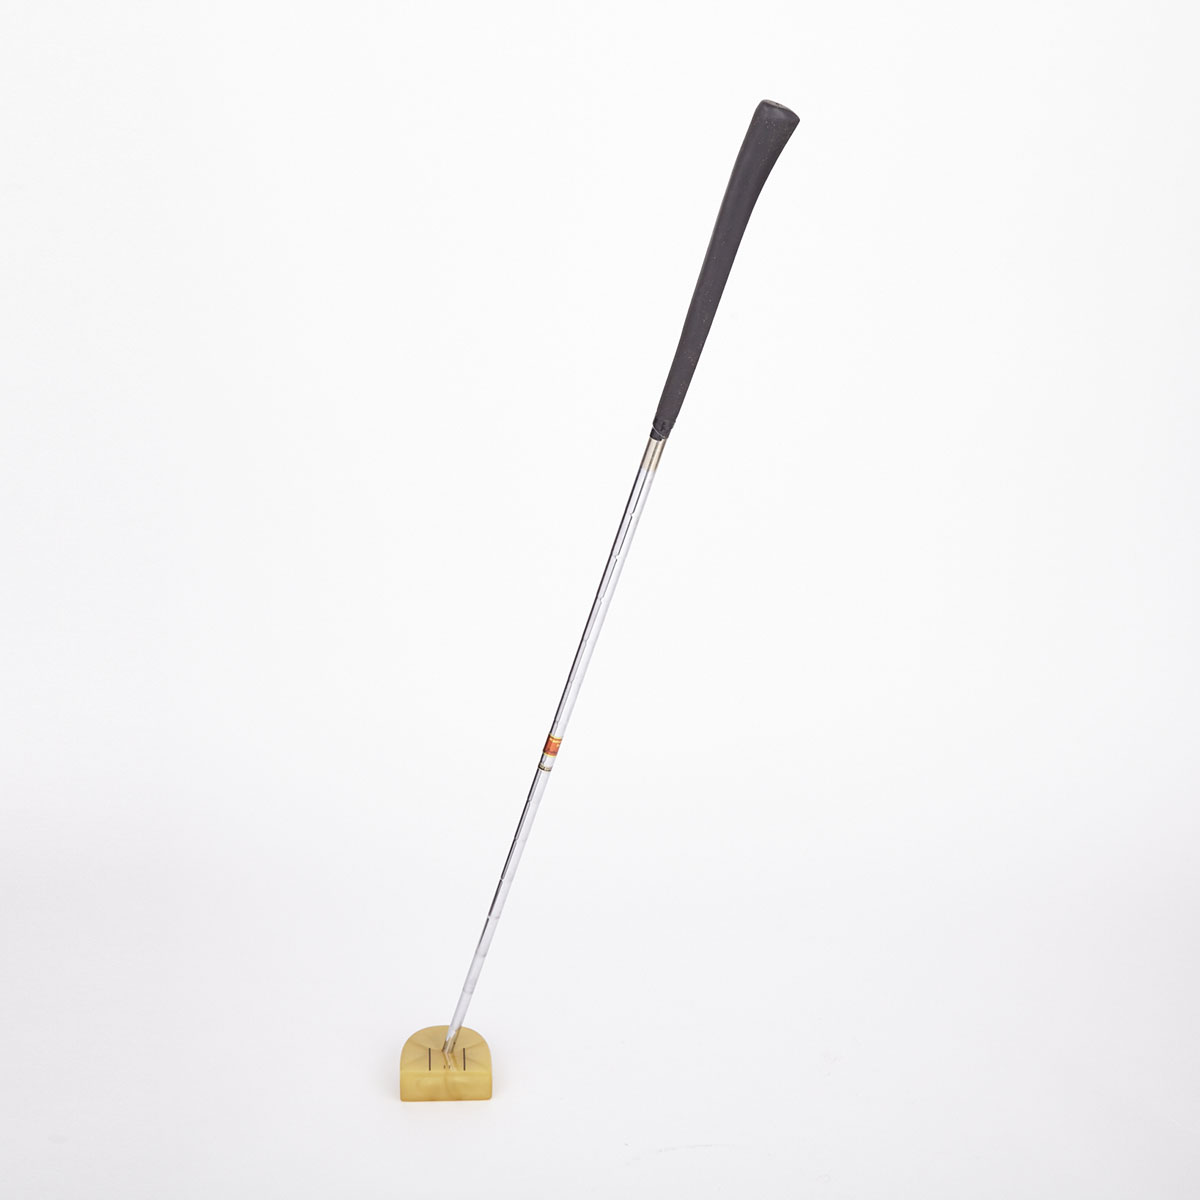 [Golf Club] John Letters & Co. ‘Potato Masher’ Putter, by Jimmy Lettes, c.1960